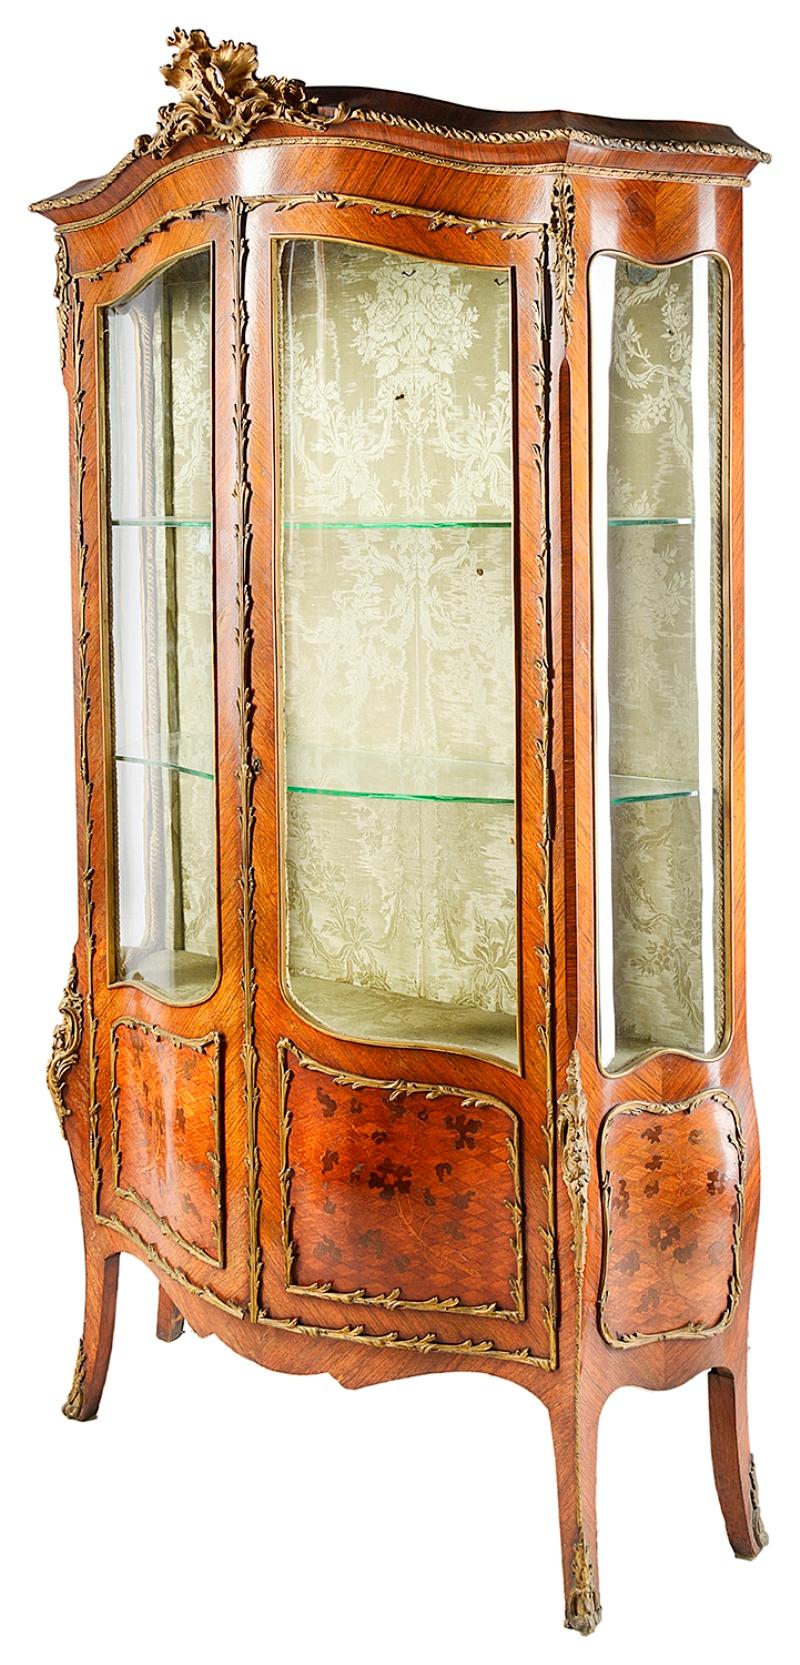 A good quality late 19th century French Louis XVI style Kingwood vitrine, having gilded ormolu mounts, serpentine fronted with shaped glass panels, glass shelves within, foliate marquetry inlay to the door panels and raised on elegant out swept legs.